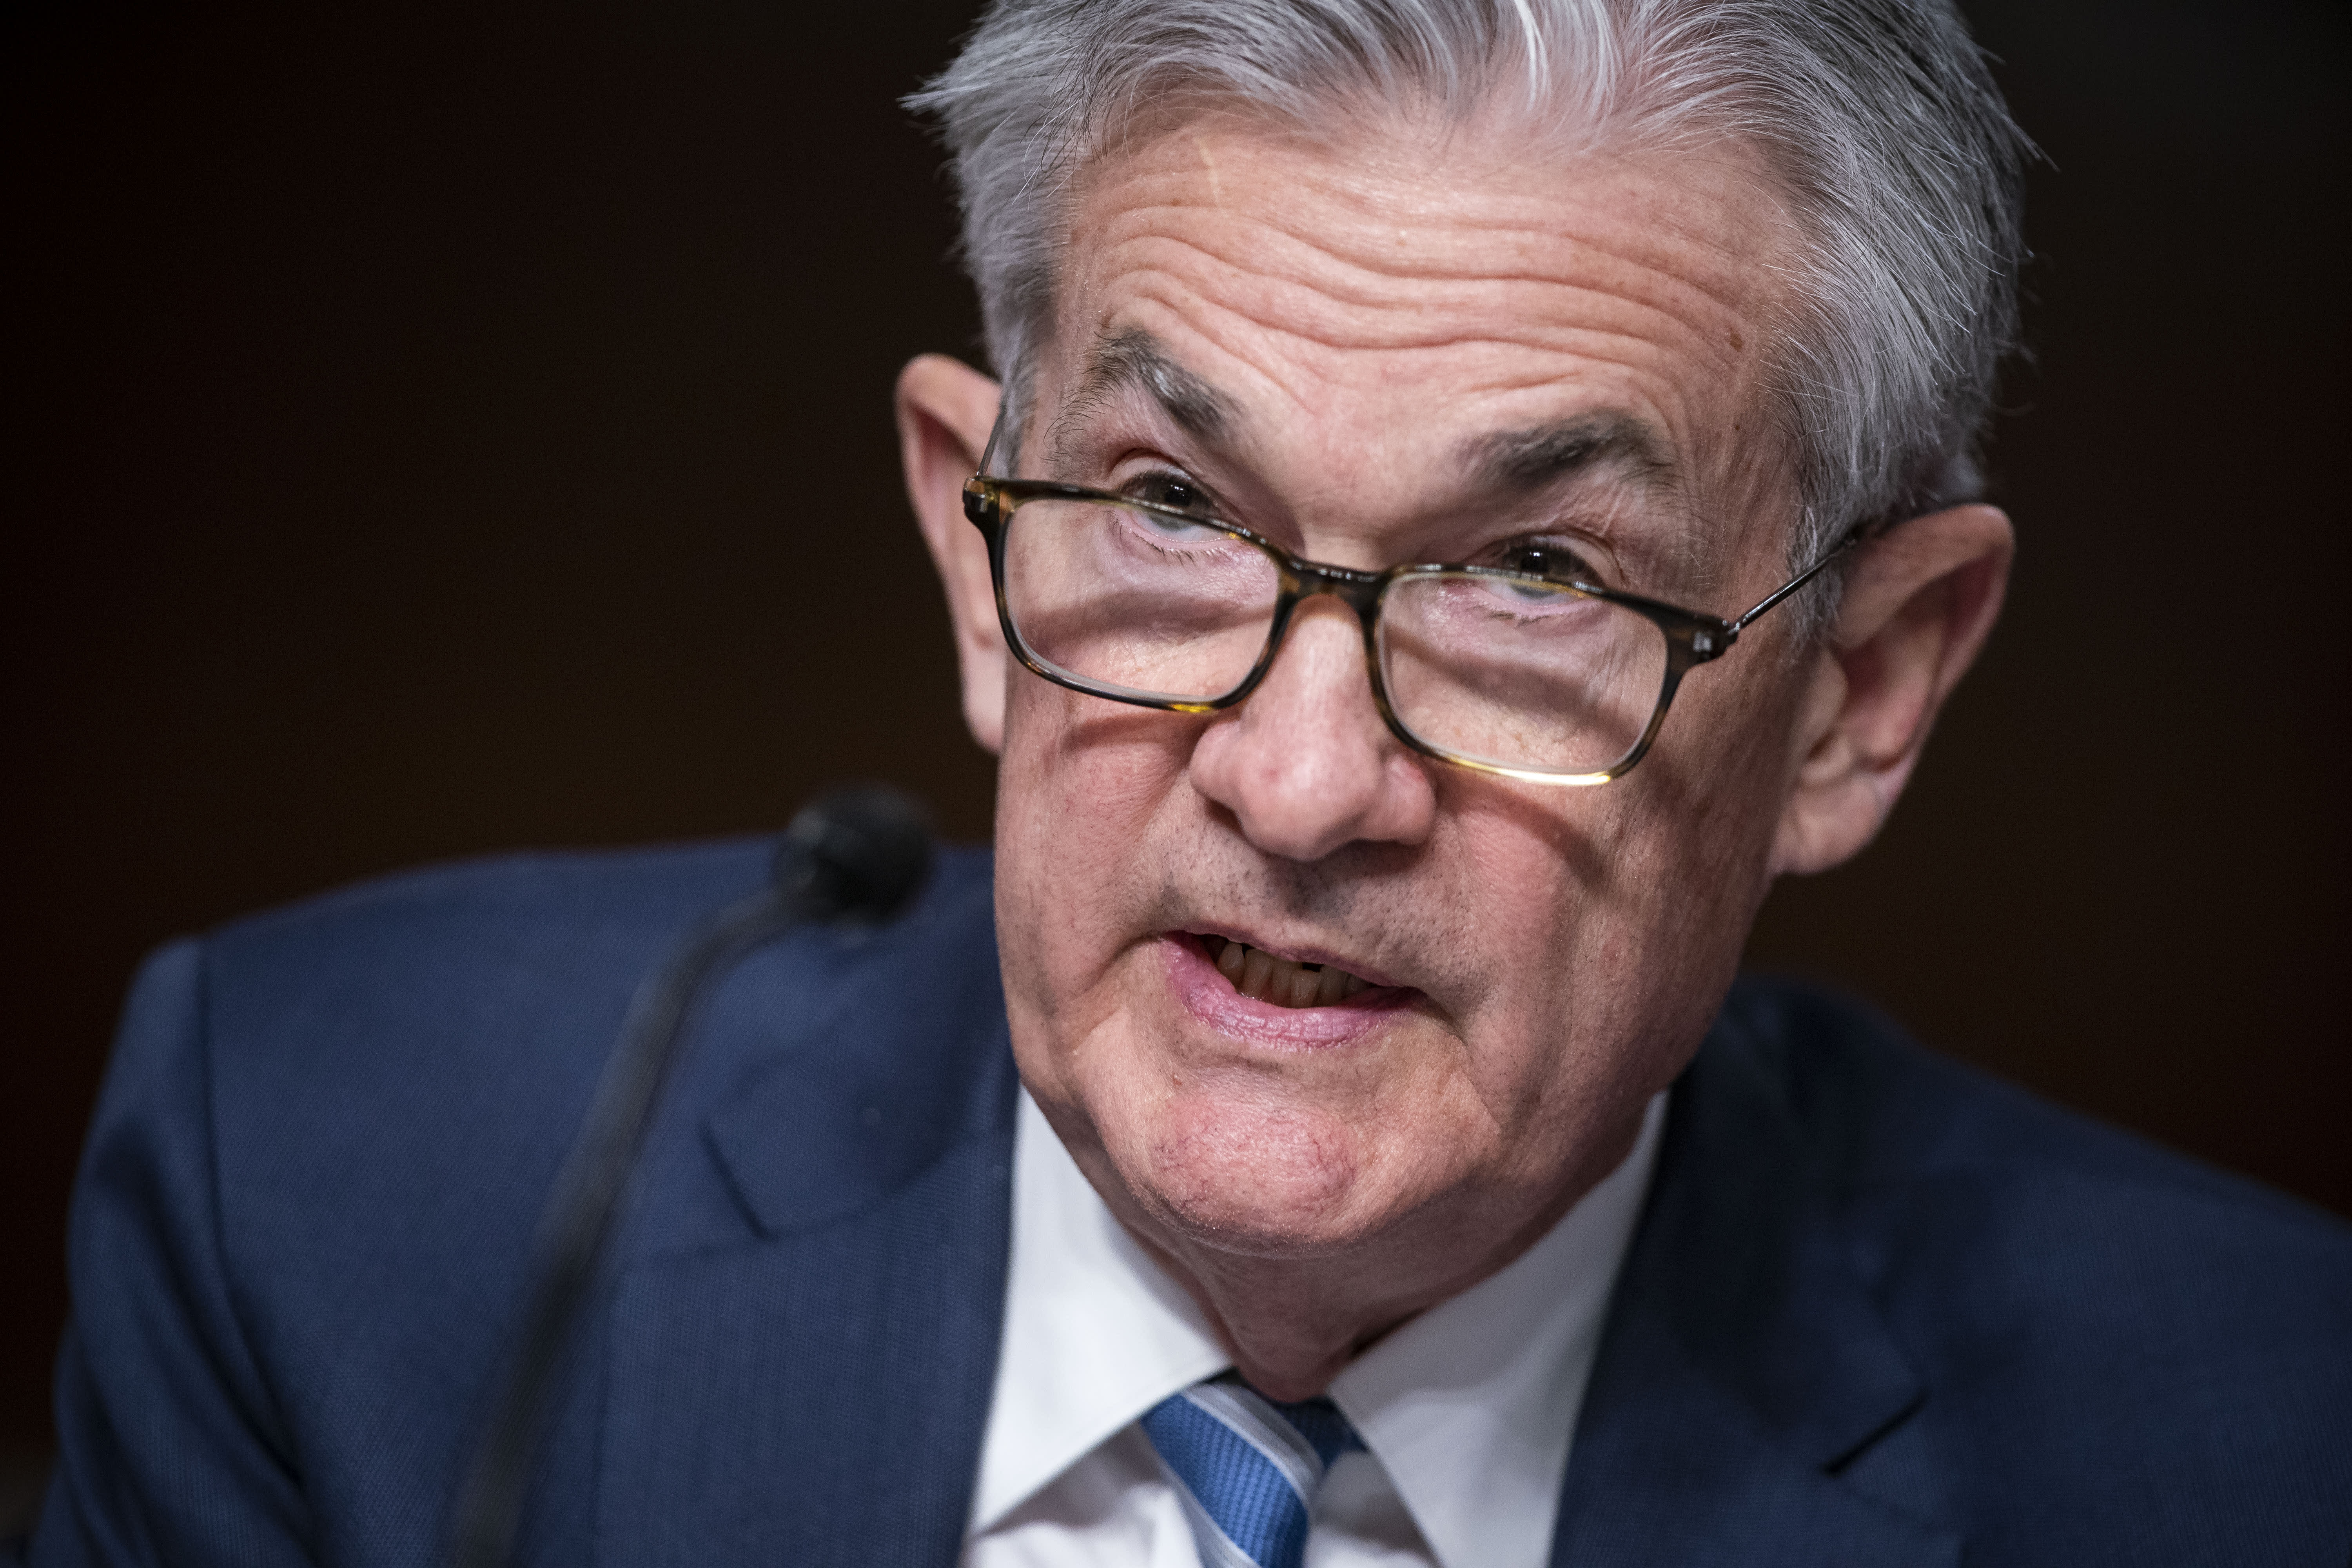 Watch Federal Reserve Chair Powell speak live on policy before House committee – CNBC